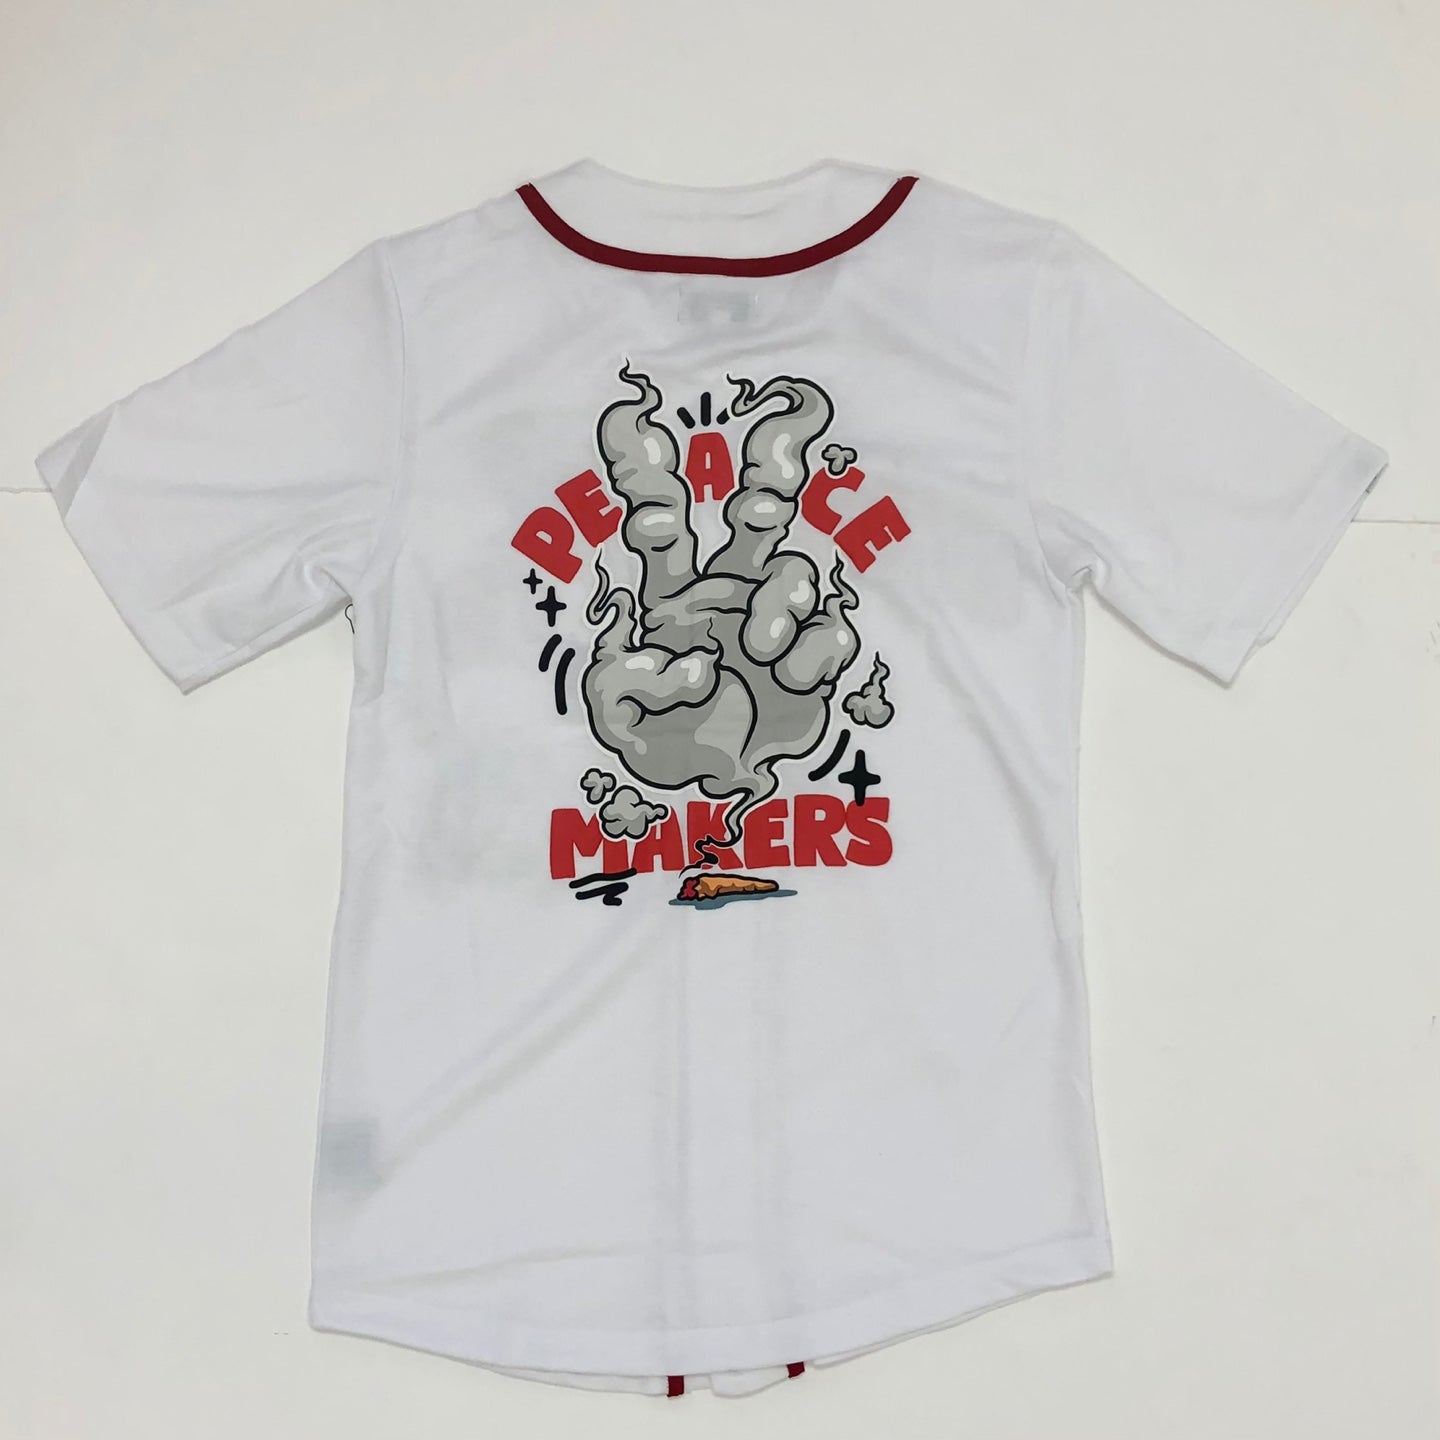 HIGHLY UNDRTD Peace Makers Graphic Baseball Jersey T-Shirt